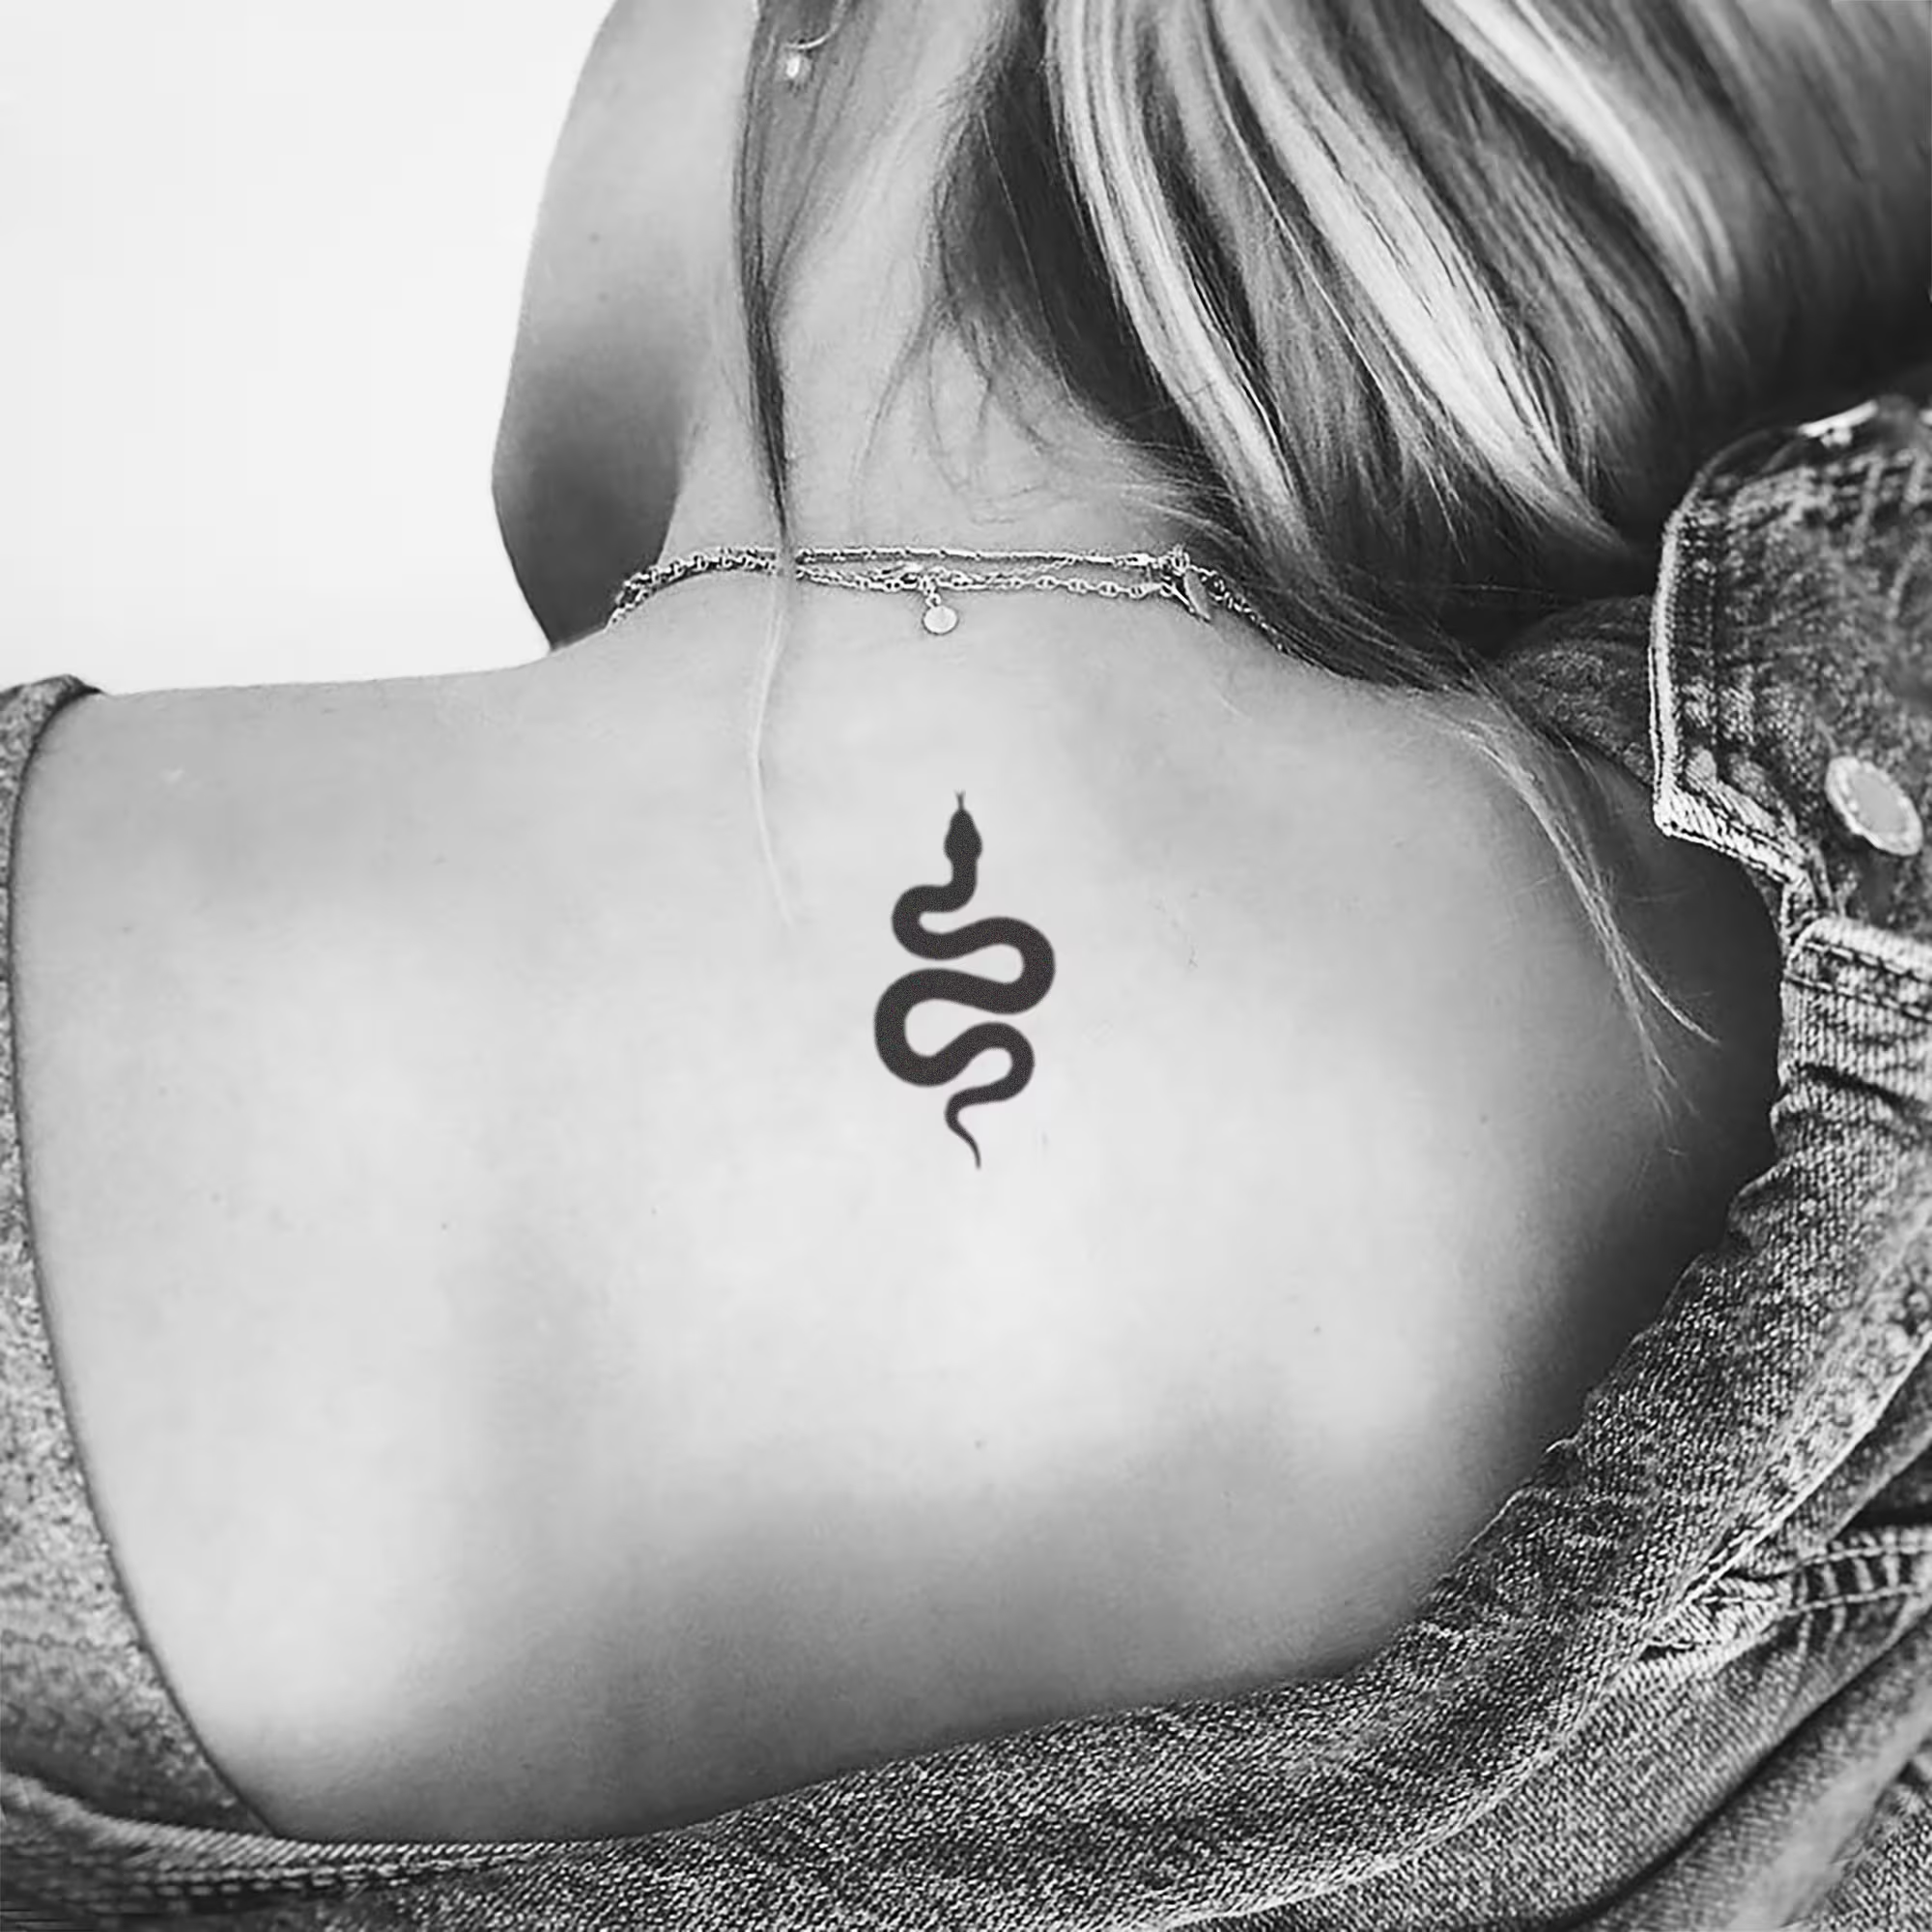 World Tattoo Portal shares simple and small tattoo trends for women -  Digital Journal